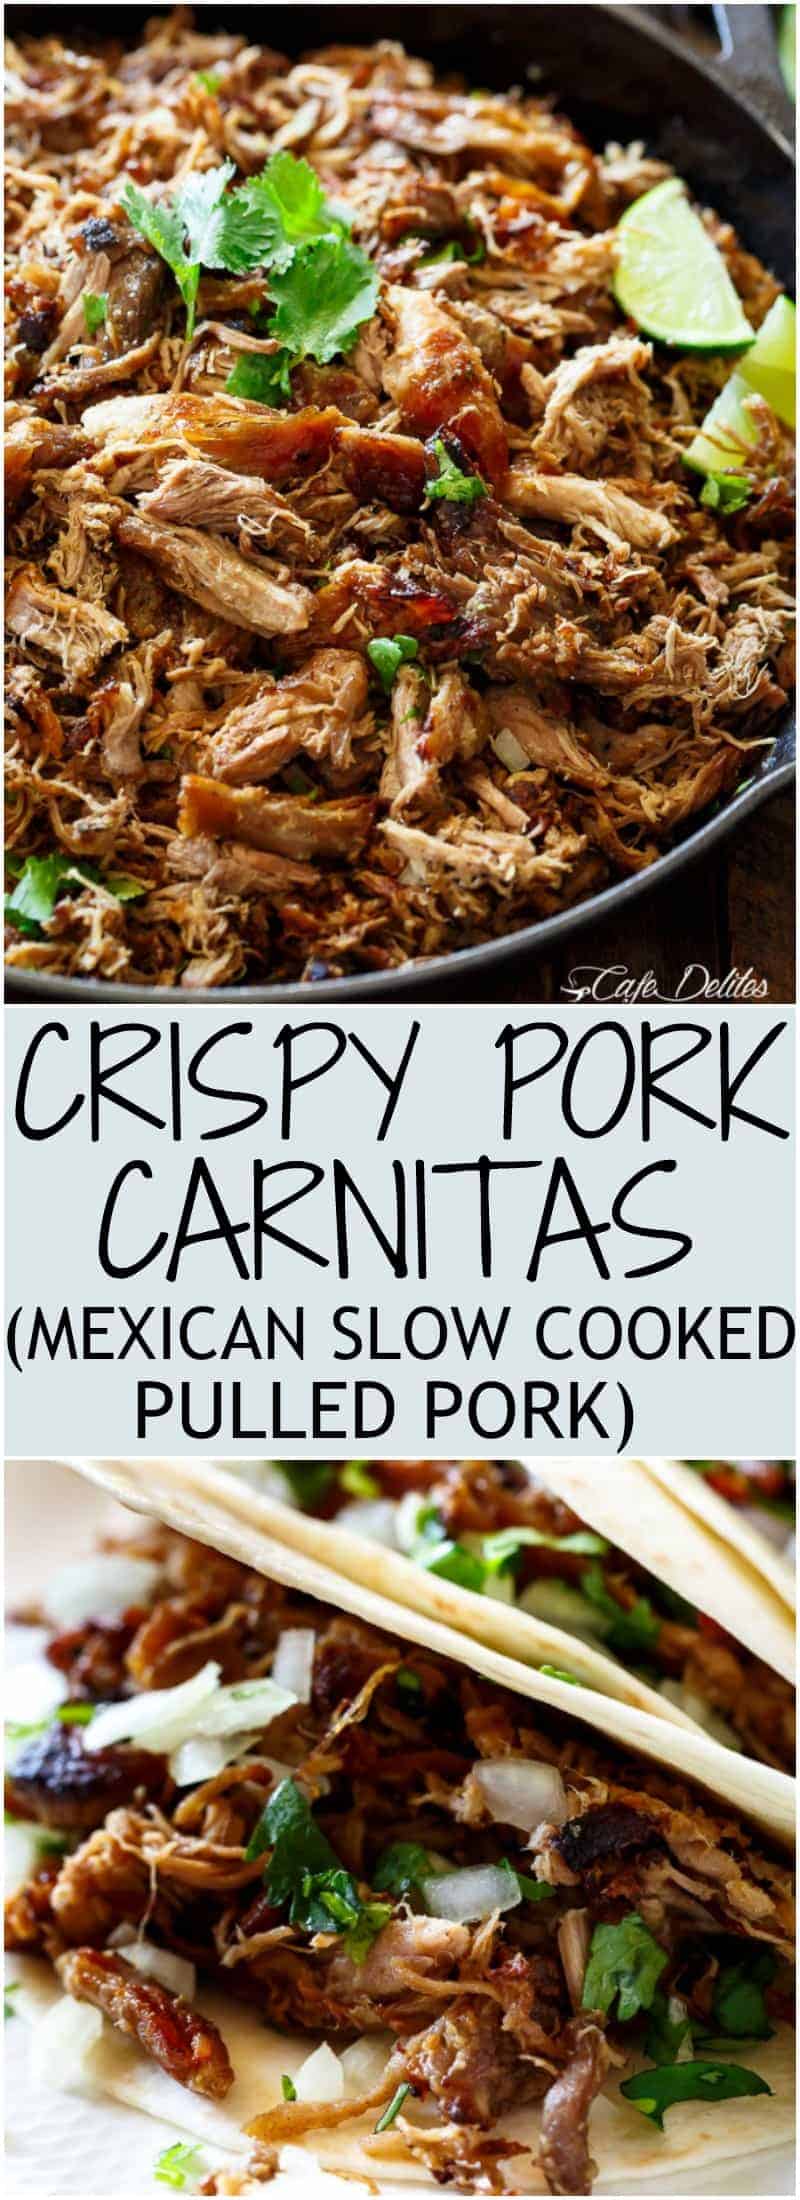 Crispy Pork Carnitas (Mexican Slow Cooked Pulled Pork) is a winner! The closest recipe to authentic Mexican Carnitas (NO LARD), with a perfect crisp finish! | https://cafedelites.com #carnitas #slowcooker #mexican #pulledpork #tacos